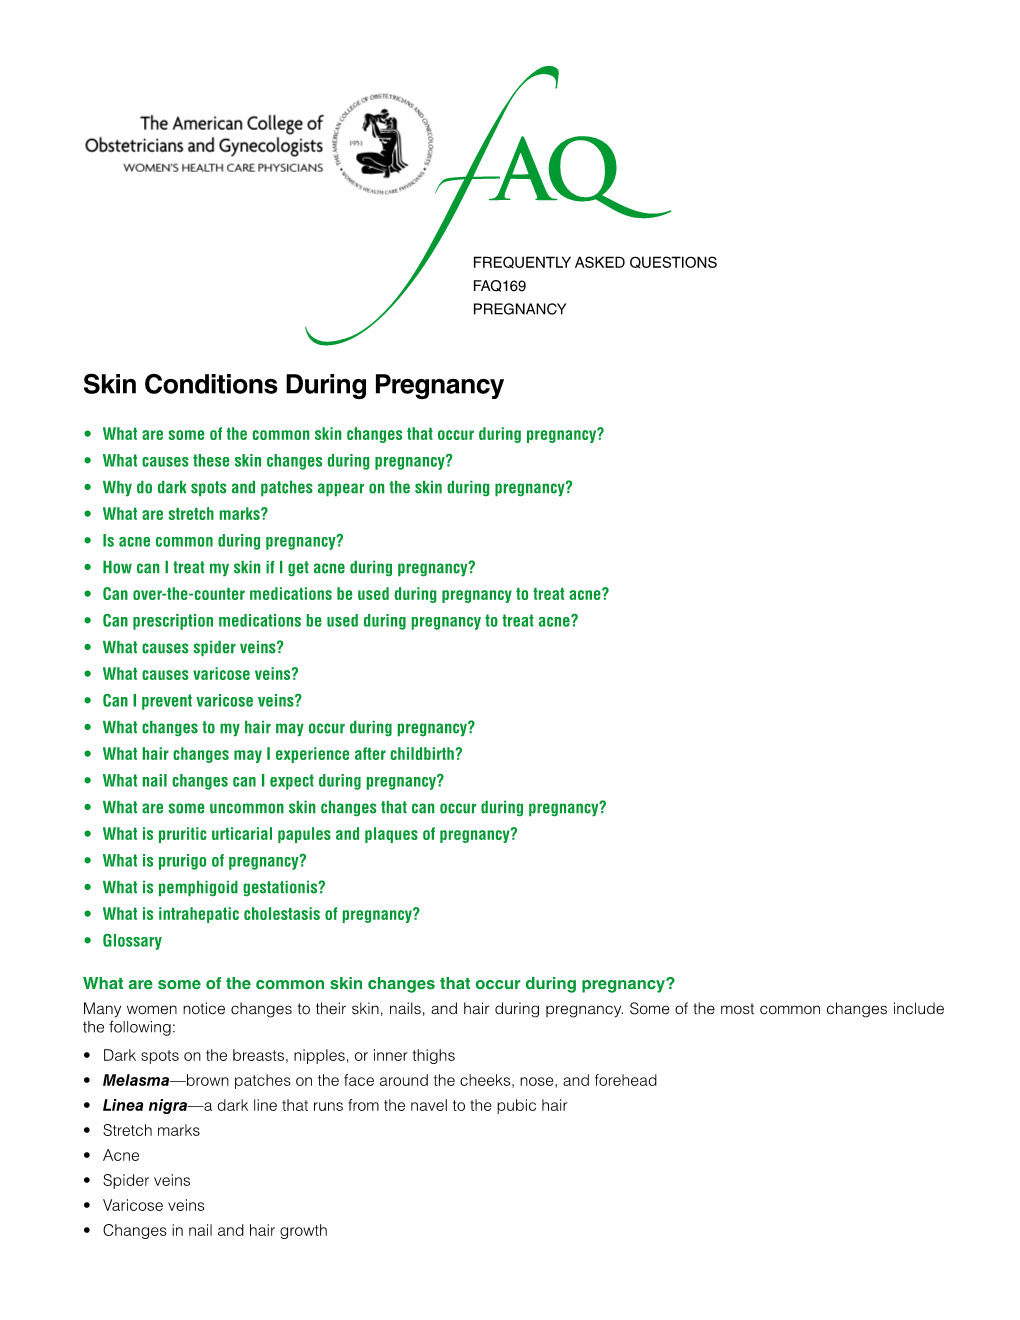 Skin Conditions During Pregnancy